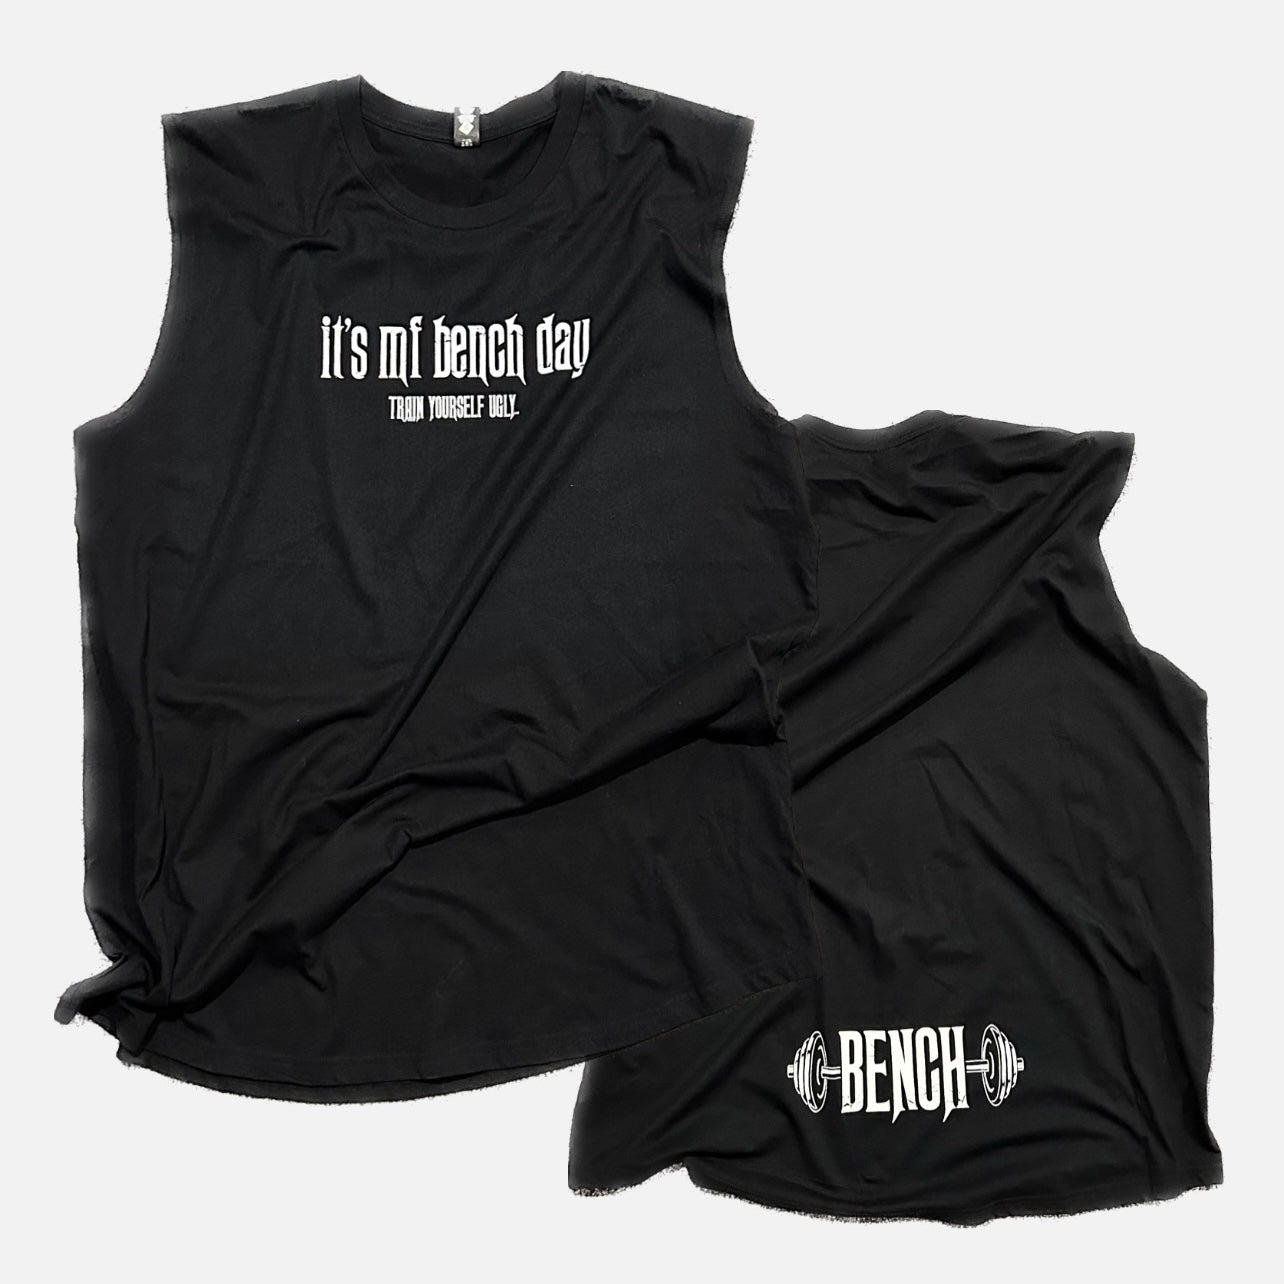 The MF Bench Day Tank